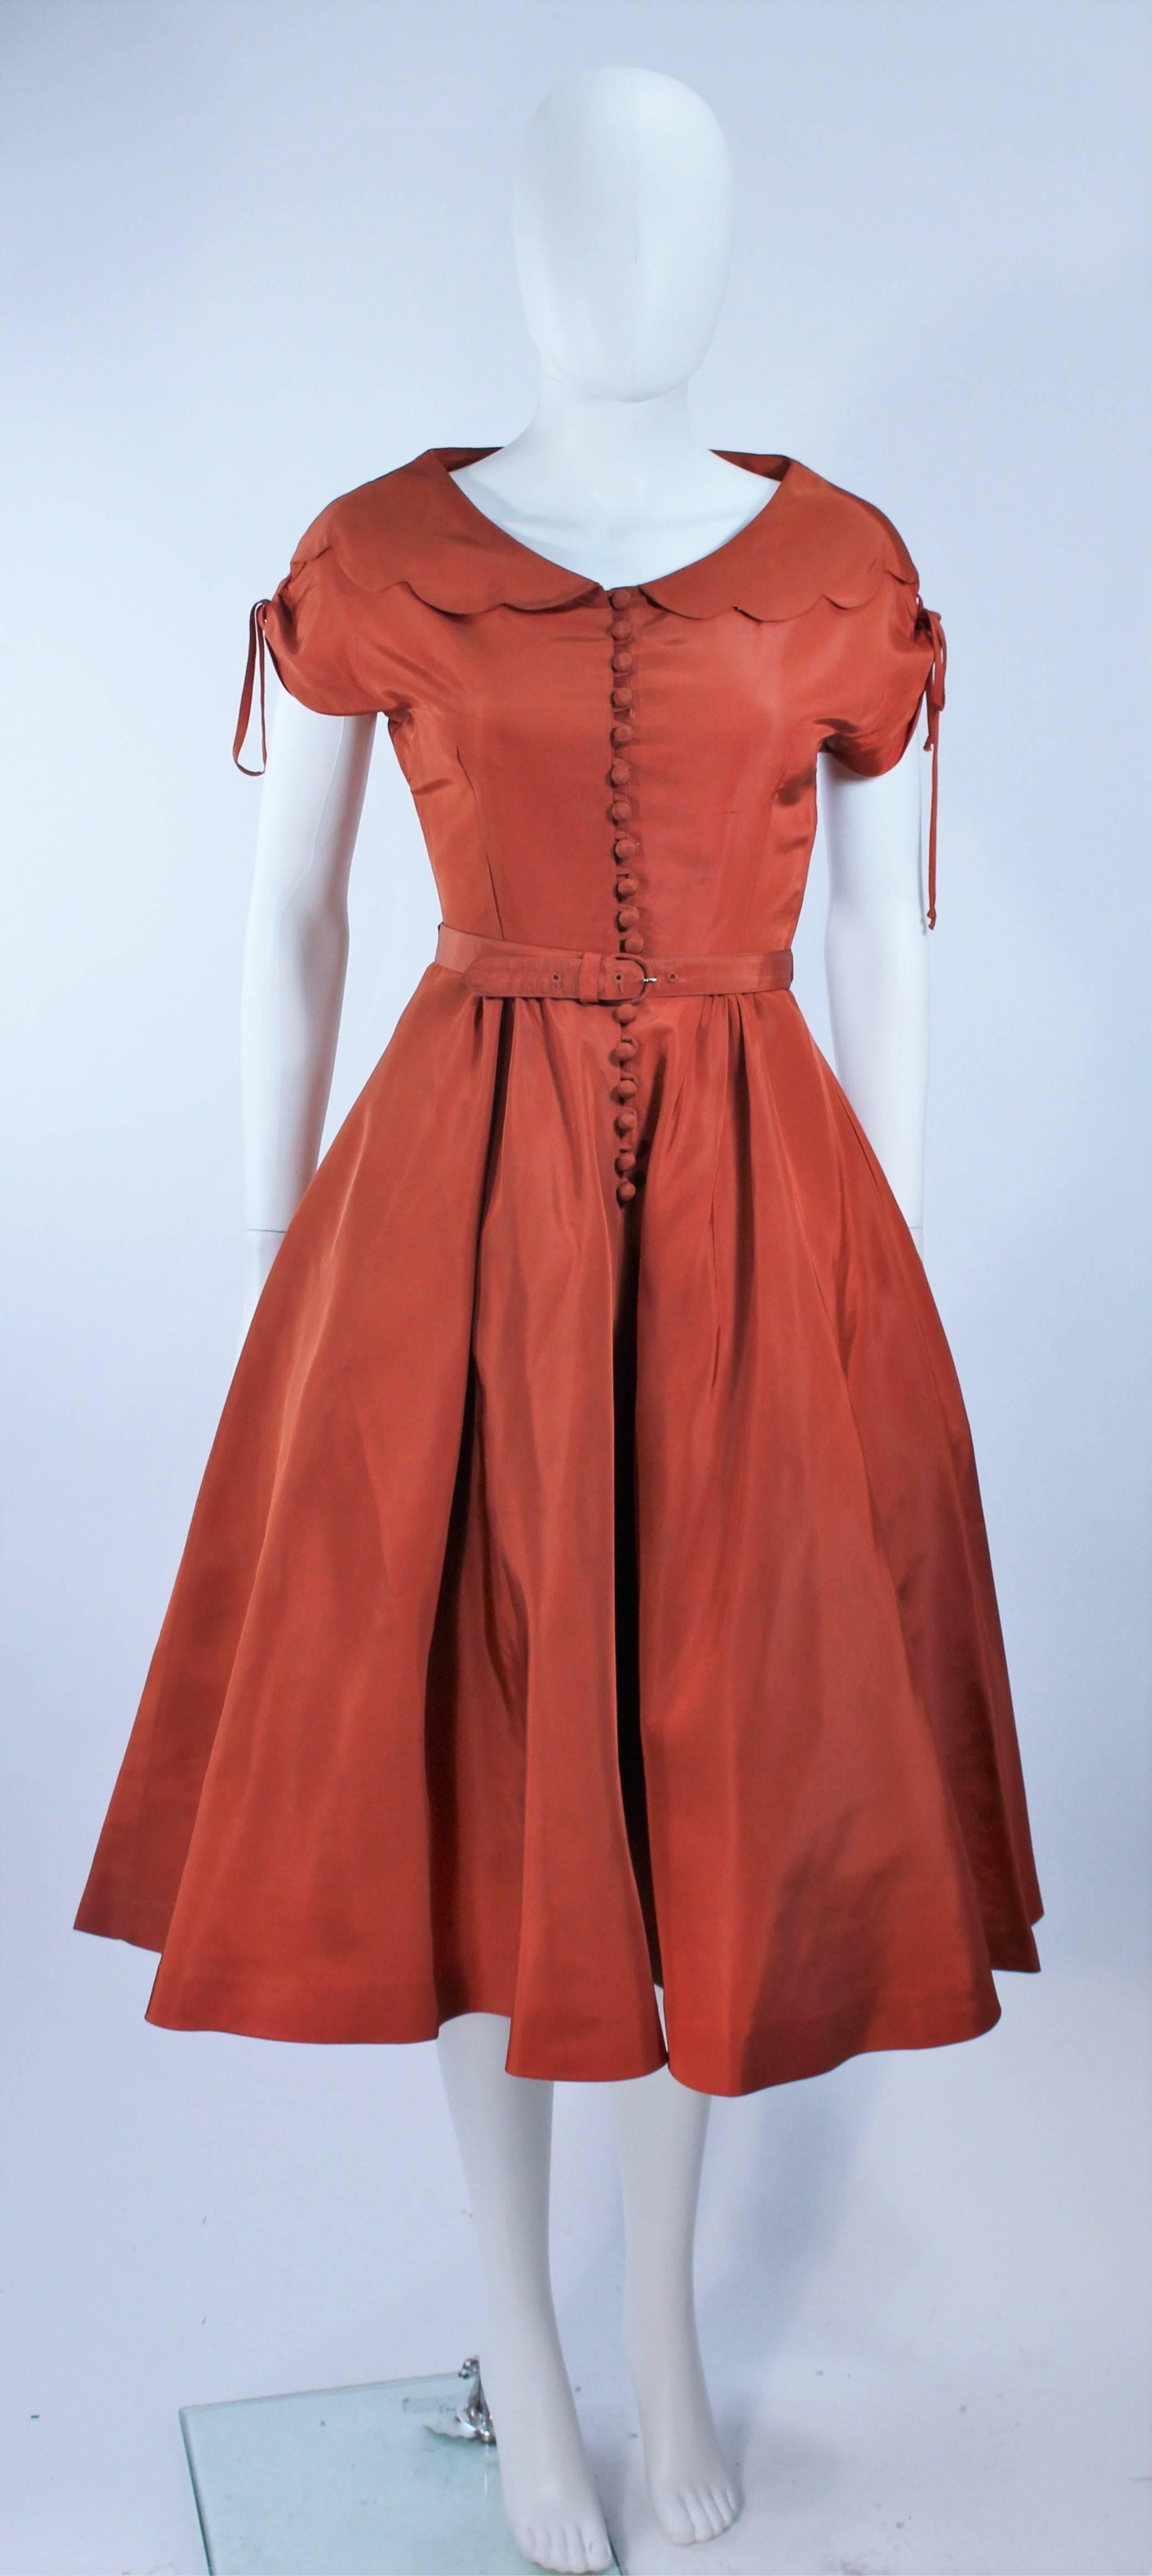 This cocktail dress is composed of a burnished orange taffeta. Features scalloped edges with center front button closures and belt. In excellent vintage condition, small spot on back (see photo). Shown with crinoline (sold separately).

**Please